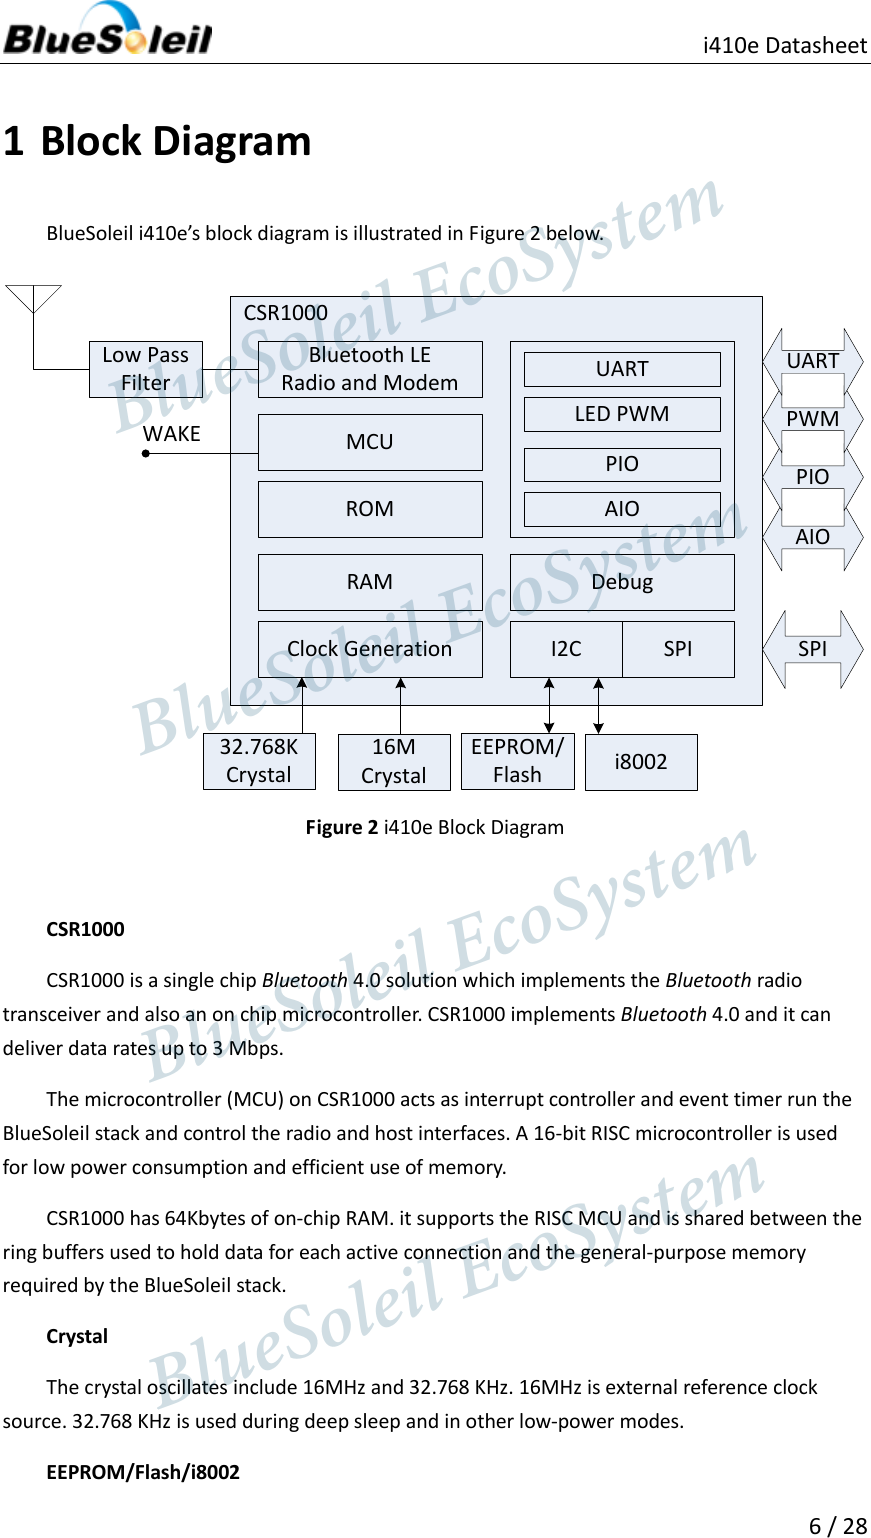                                               i410e Datasheet   6 / 28  1 Block Diagram BlueSoleil i410e’s block diagram is illustrated in Figure 2 below. DebugMCUROMRAMClock Generation I2C SPIBluetooth LERadio and Modem UARTLED PWMPIOAIOEEPROM/FlashSPIAIOPIOPWMUART32.768K Crystal16M CrystalWAKELow Pass FilterCSR1000i8002 Figure 2 i410e Block Diagram  CSR1000   CSR1000 is a single chip Bluetooth 4.0 solution which implements the Bluetooth radio transceiver and also an on chip microcontroller. CSR1000 implements Bluetooth 4.0 and it can deliver data rates up to 3 Mbps.   The microcontroller (MCU) on CSR1000 acts as interrupt controller and event timer run the BlueSoleil stack and control the radio and host interfaces. A 16-bit RISC microcontroller is used for low power consumption and efficient use of memory. CSR1000 has 64Kbytes of on-chip RAM. it supports the RISC MCU and is shared between the ring buffers used to hold data for each active connection and the general-purpose memory required by the BlueSoleil stack.   Crystal   The crystal oscillates include 16MHz and 32.768 KHz. 16MHz is external reference clock source. 32.768 KHz is used during deep sleep and in other low-power modes.   EEPROM/Flash/i8002                    BlueSoleil EcoSystem            BlueSoleil EcoSystem      BlueSoleil EcoSystemBlueSoleil EcoSystem